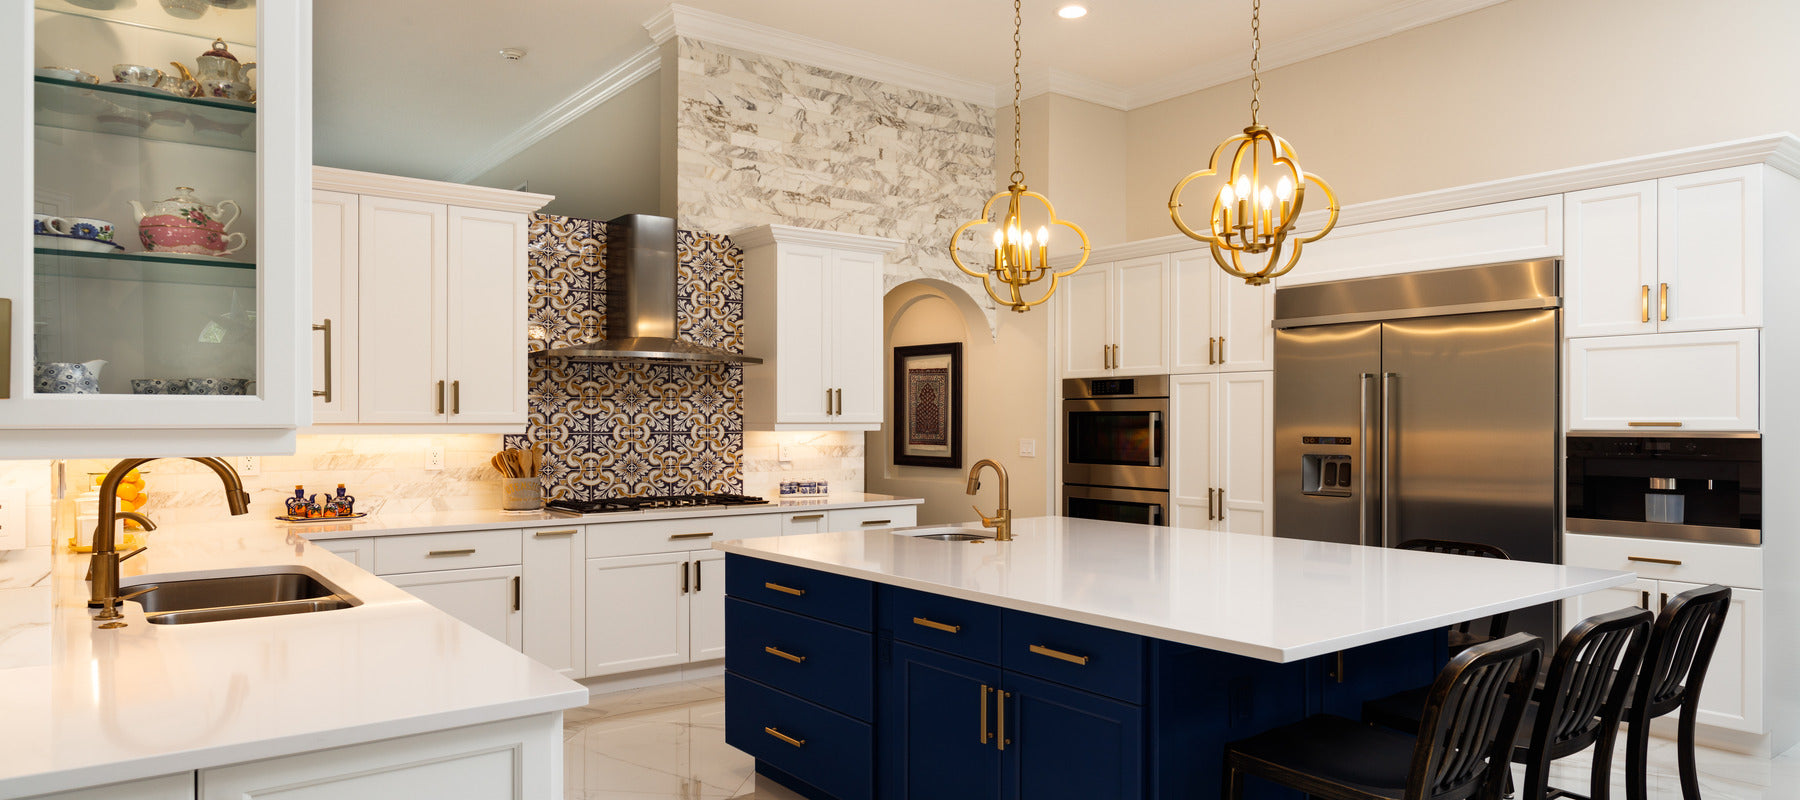 Modern white kitchen with decorative lighting hanging over island and recessed ceiling lights mounted in the ceiling